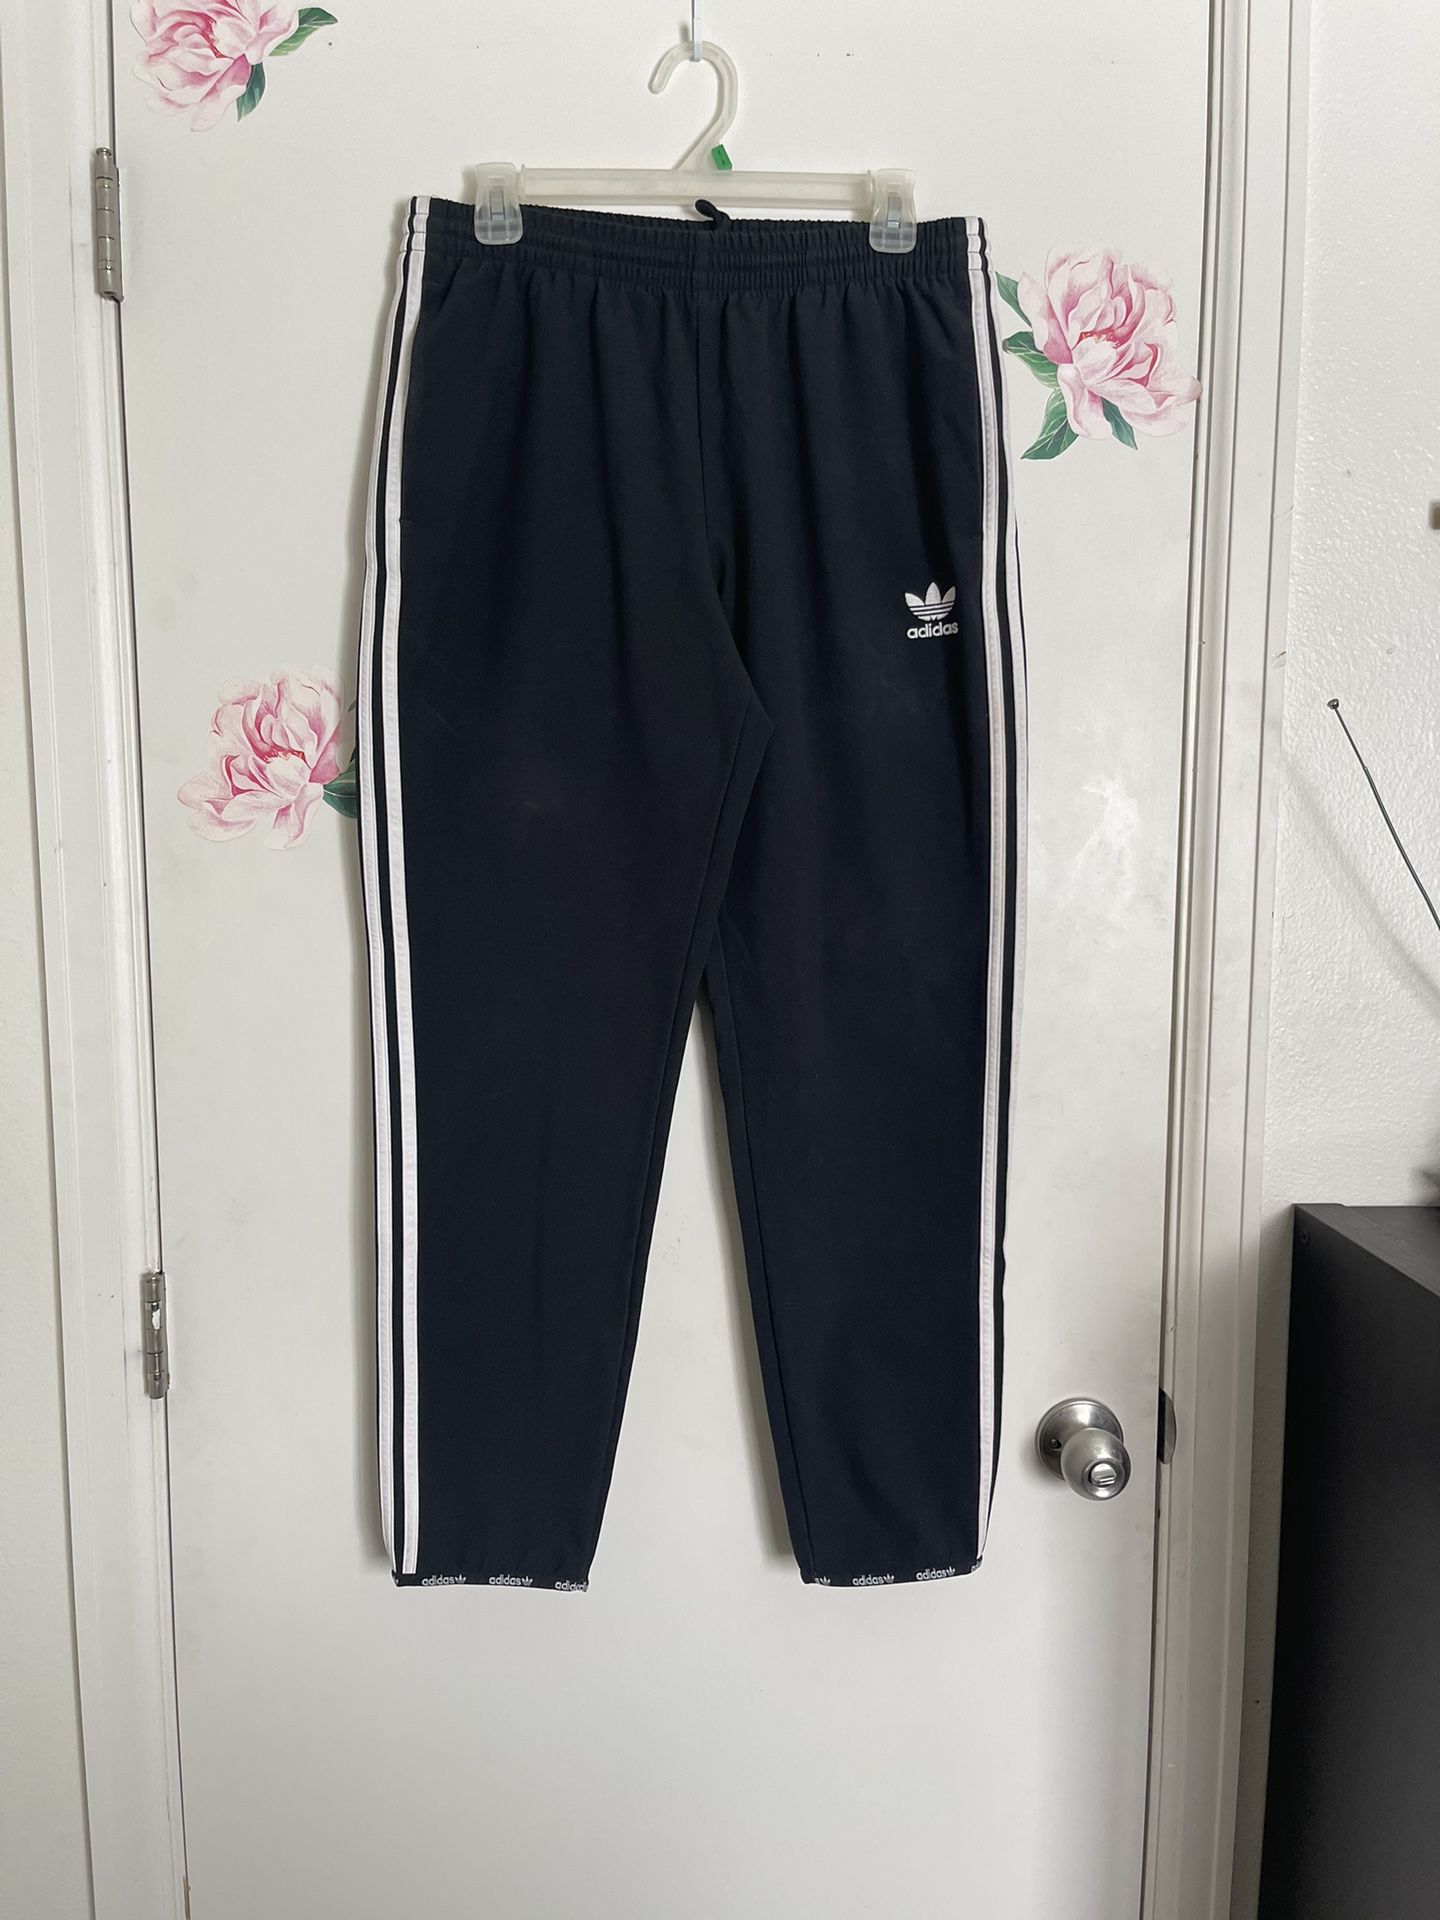 Use Once Women’s Pants Size Large From Adidas 